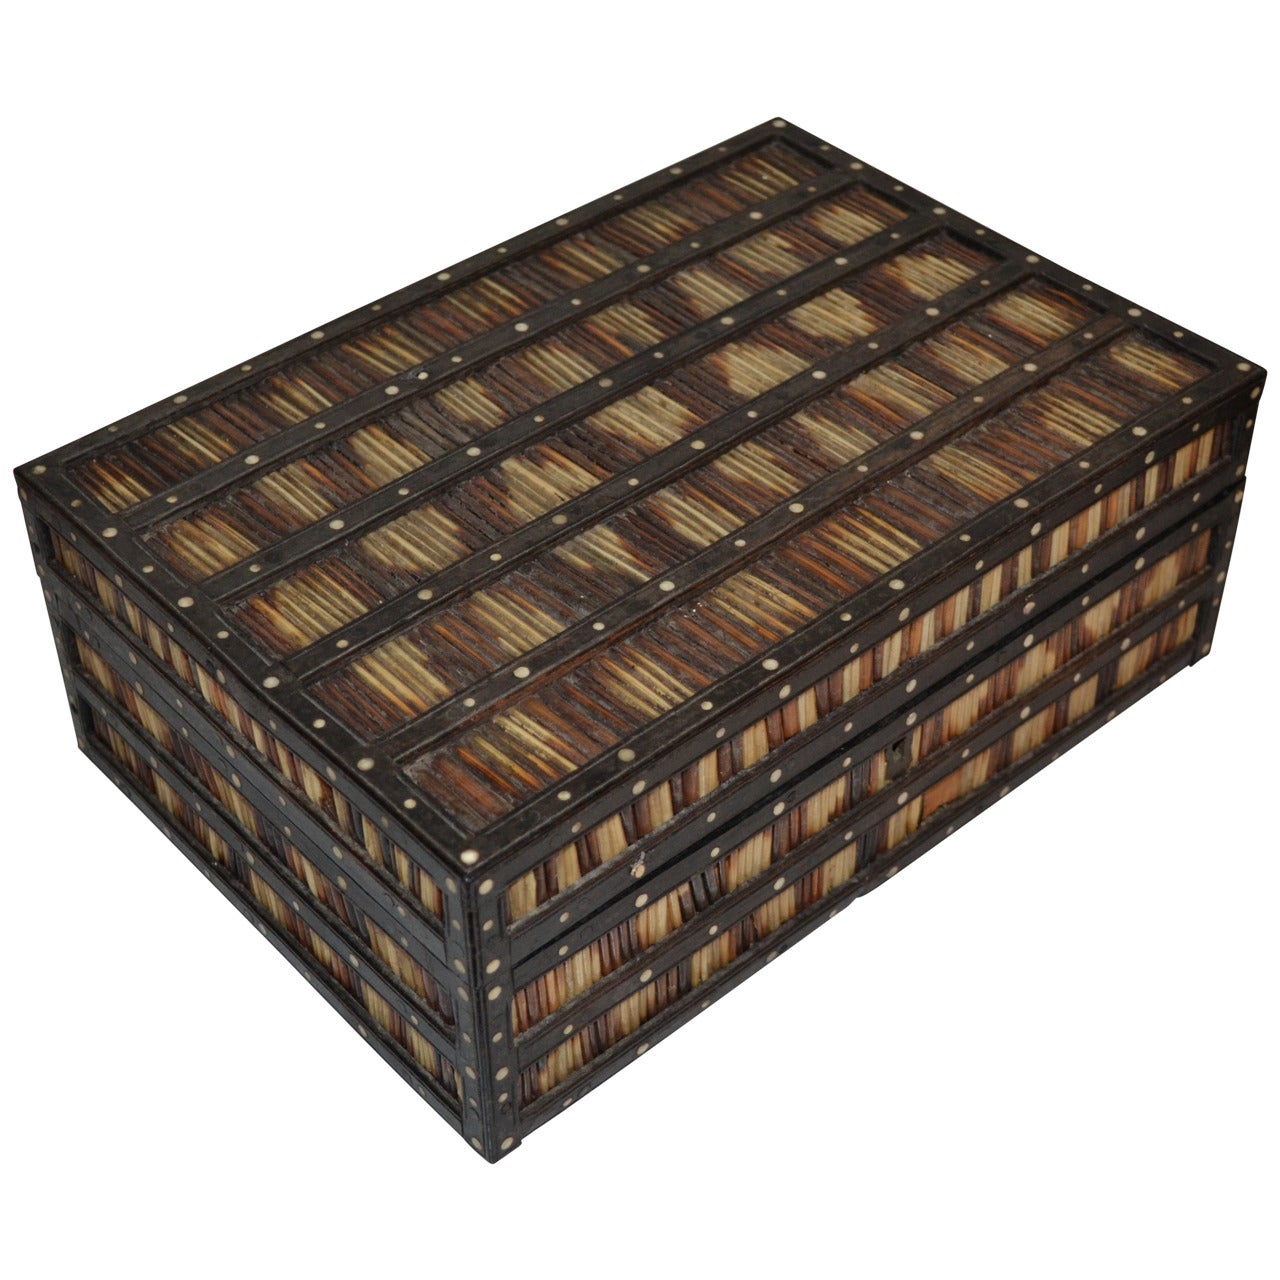 19th Century Anglo-Indian Porcupine Quill Box